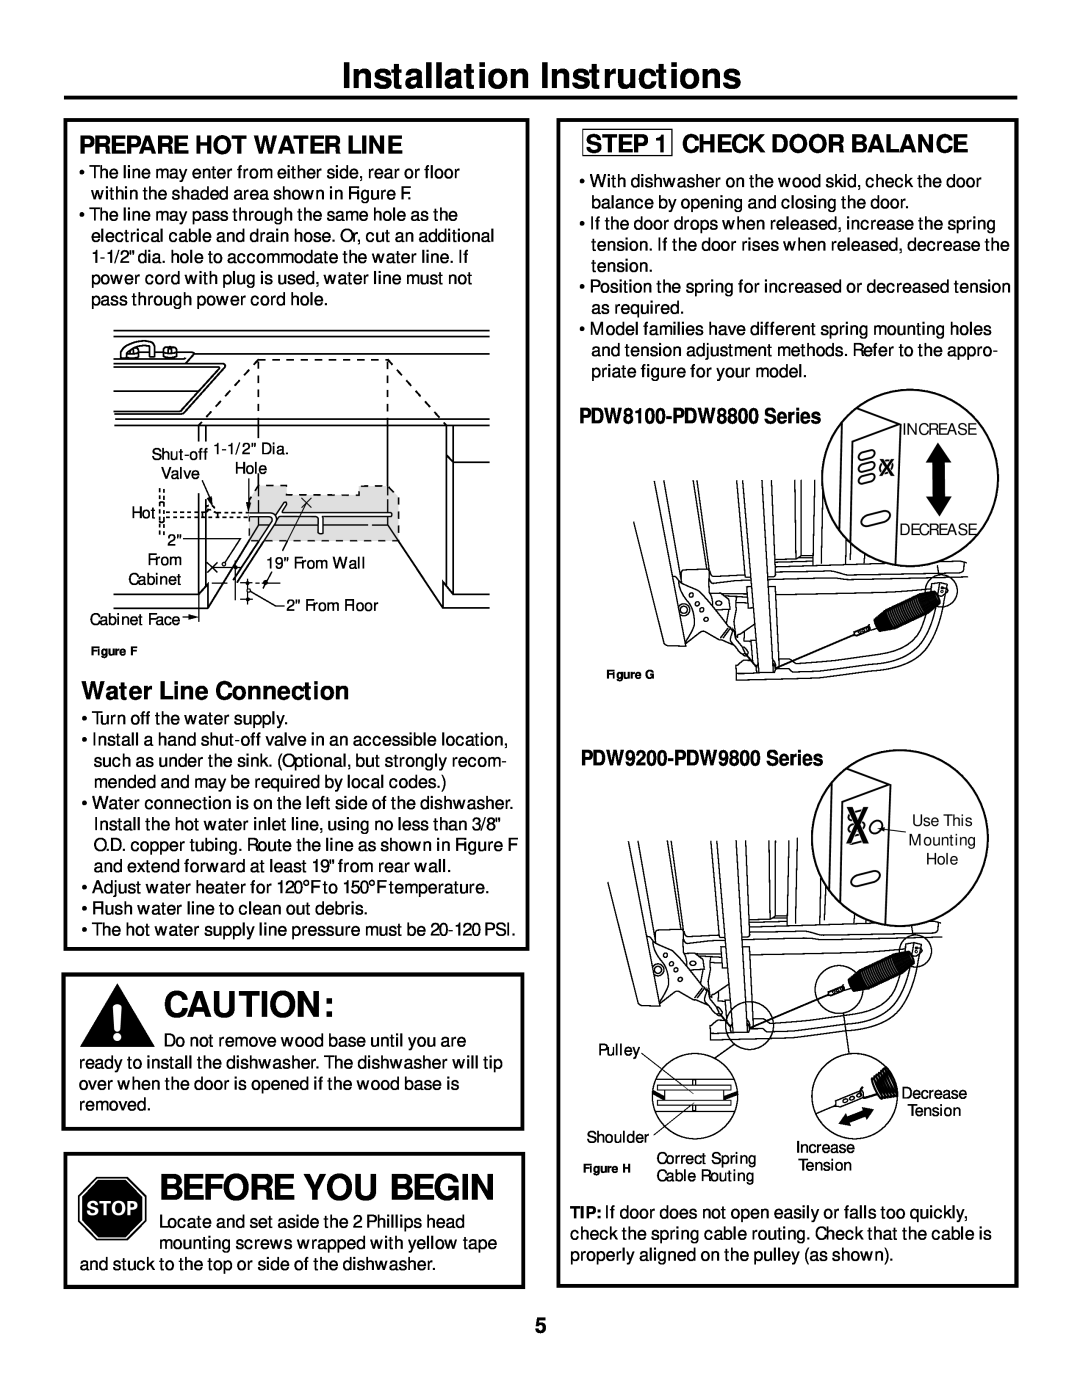 GE PDW9200 Installation Instructions, Prepare Hot Water Line, Check Door Balance, Water Line Connection, Before You Begin 